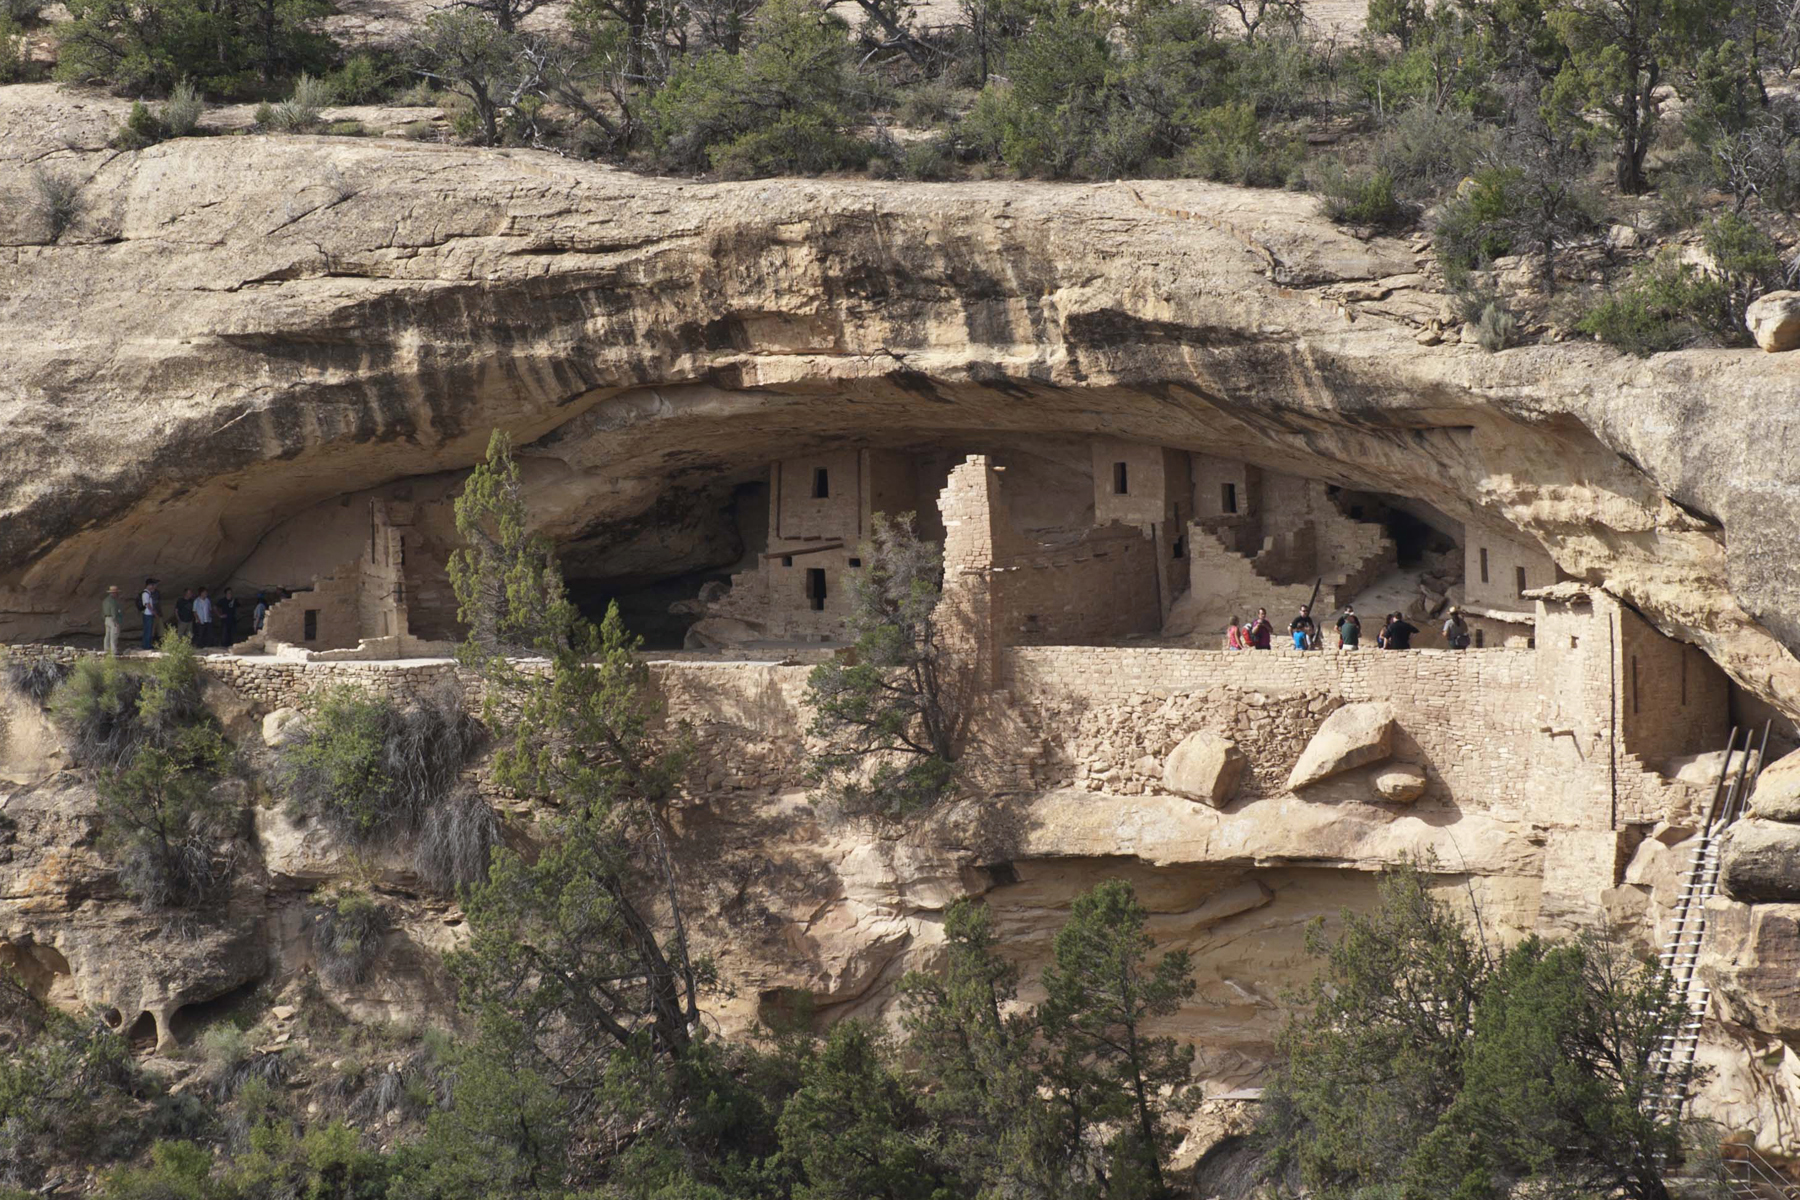 A cliff dwelling within a cliff alcove seen from across a canyon